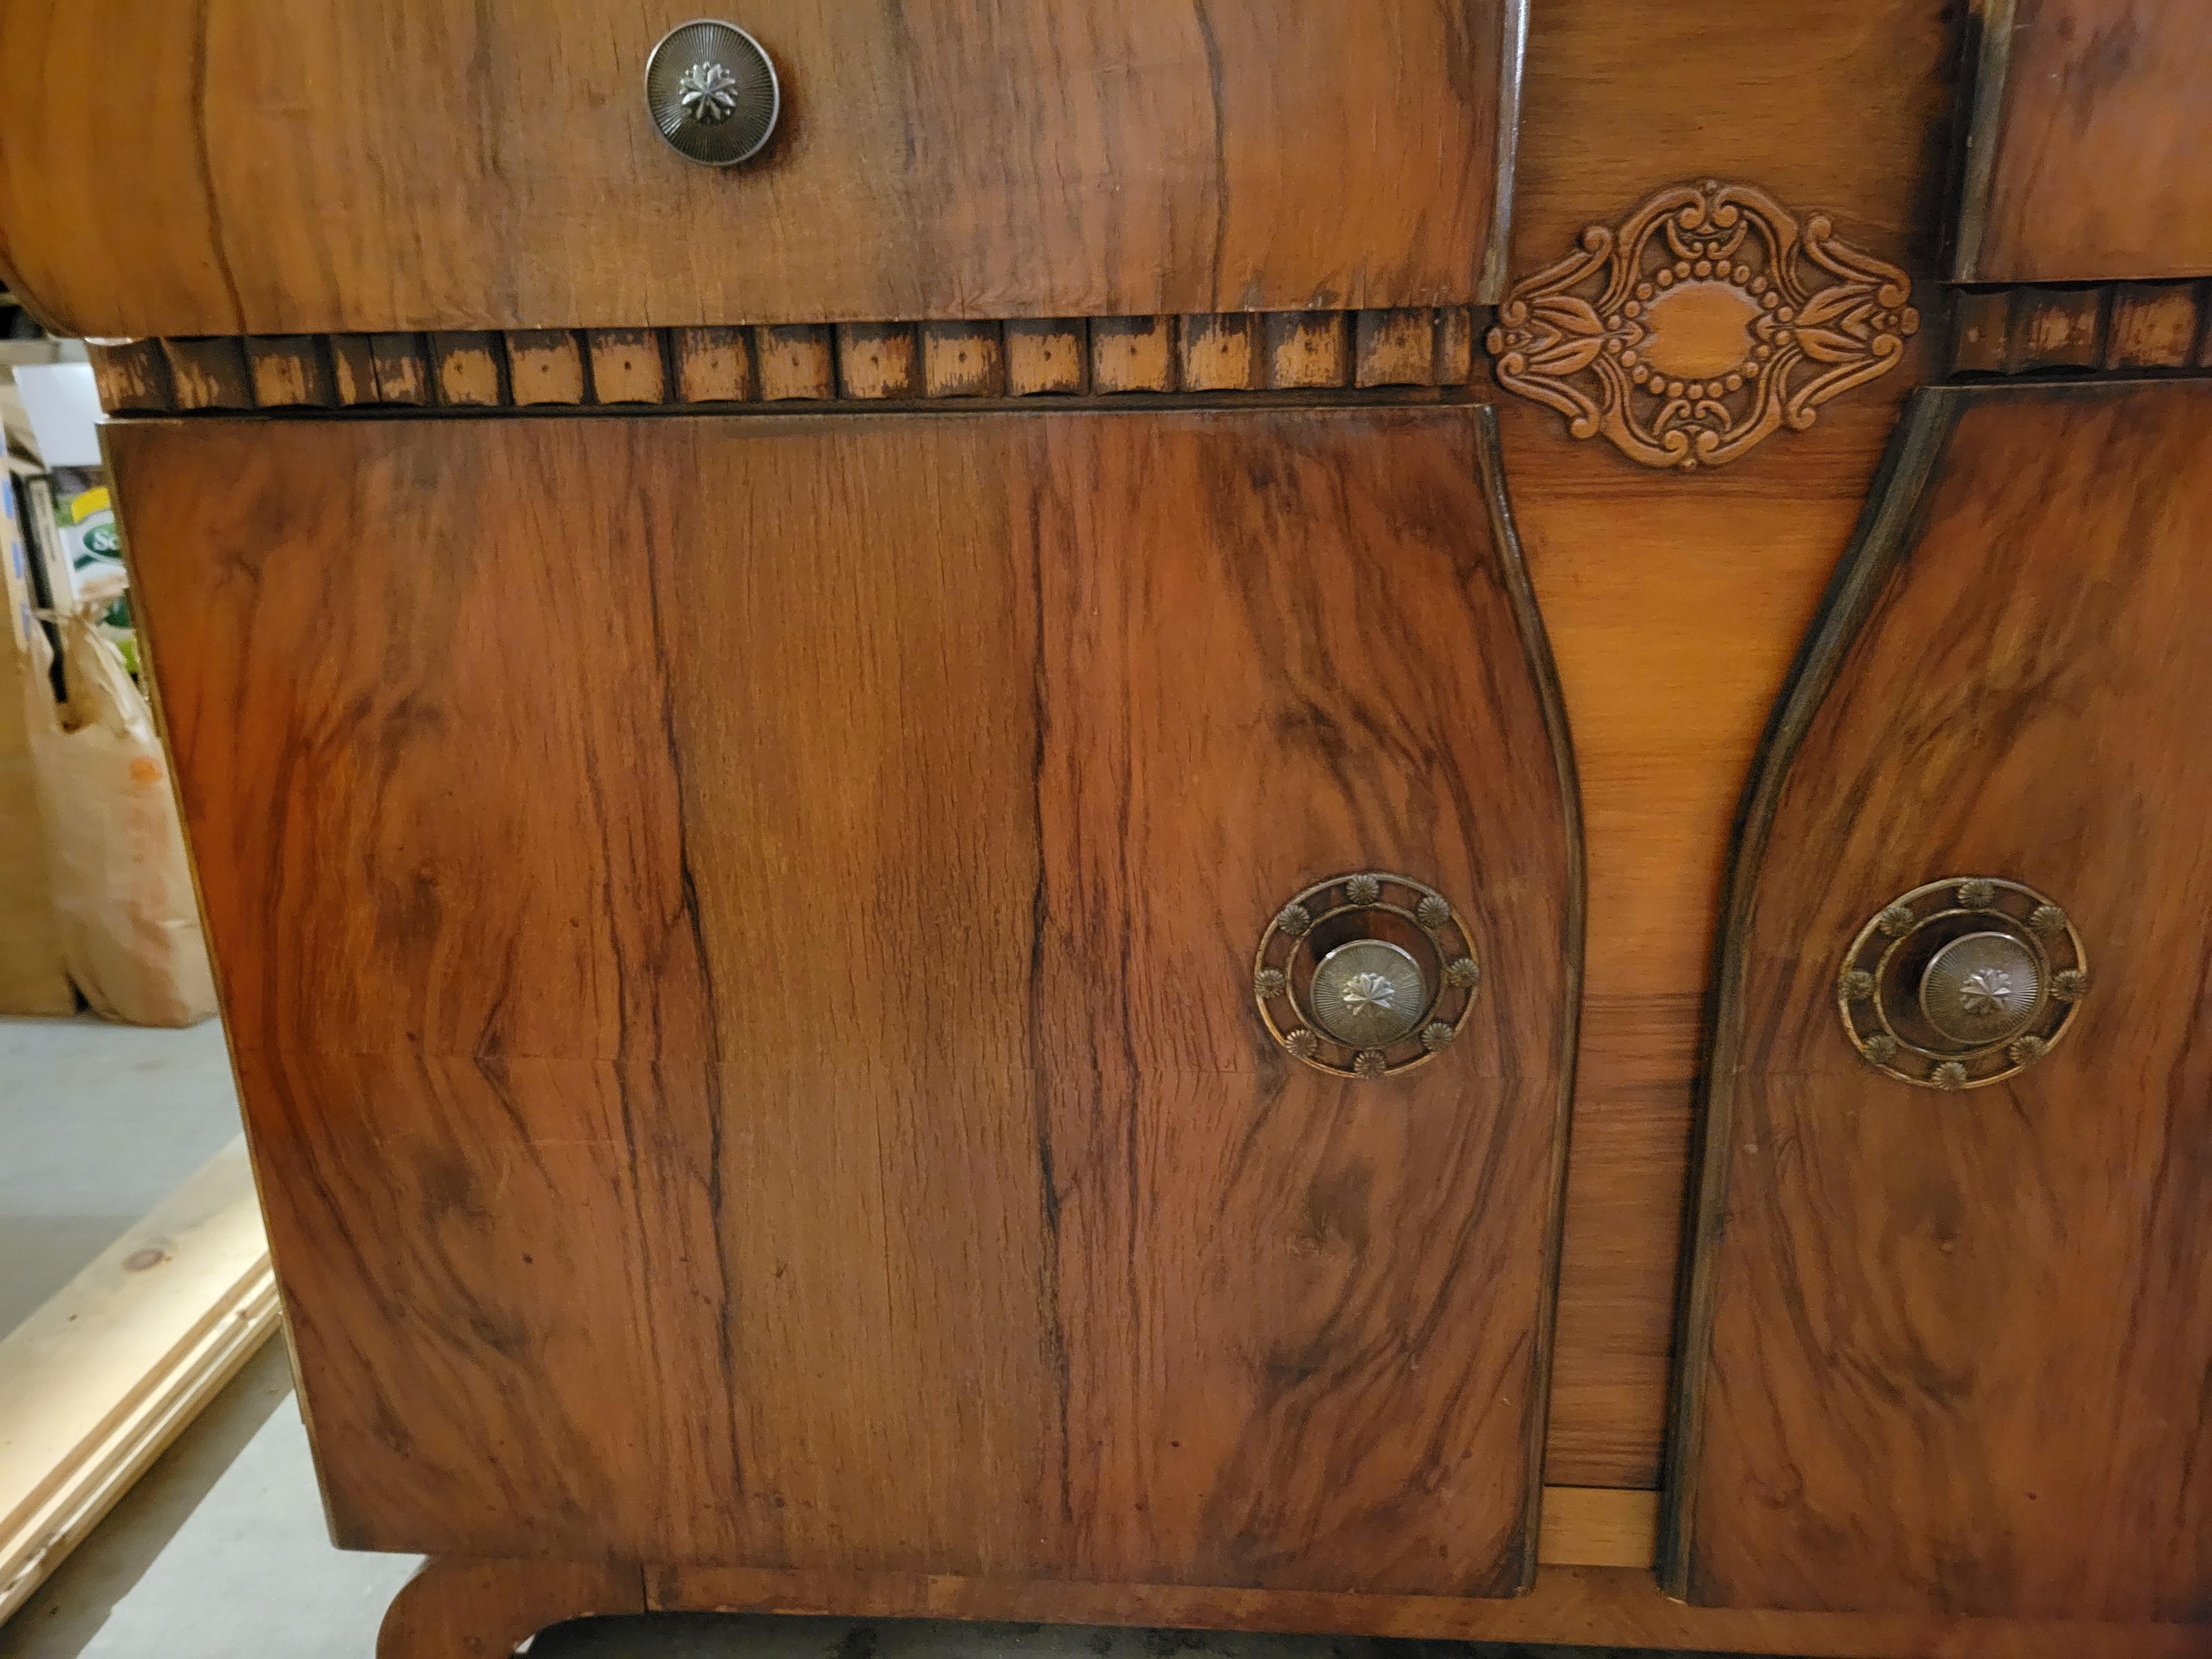 Rate antique Spanish chest that can serve as a cupboard, a buffet, a sideboard, a linen chest or just as a beautiful decorative item. The wood is quite light and looks like walnut or birch. The chest has two drawers on top and a lower compartment